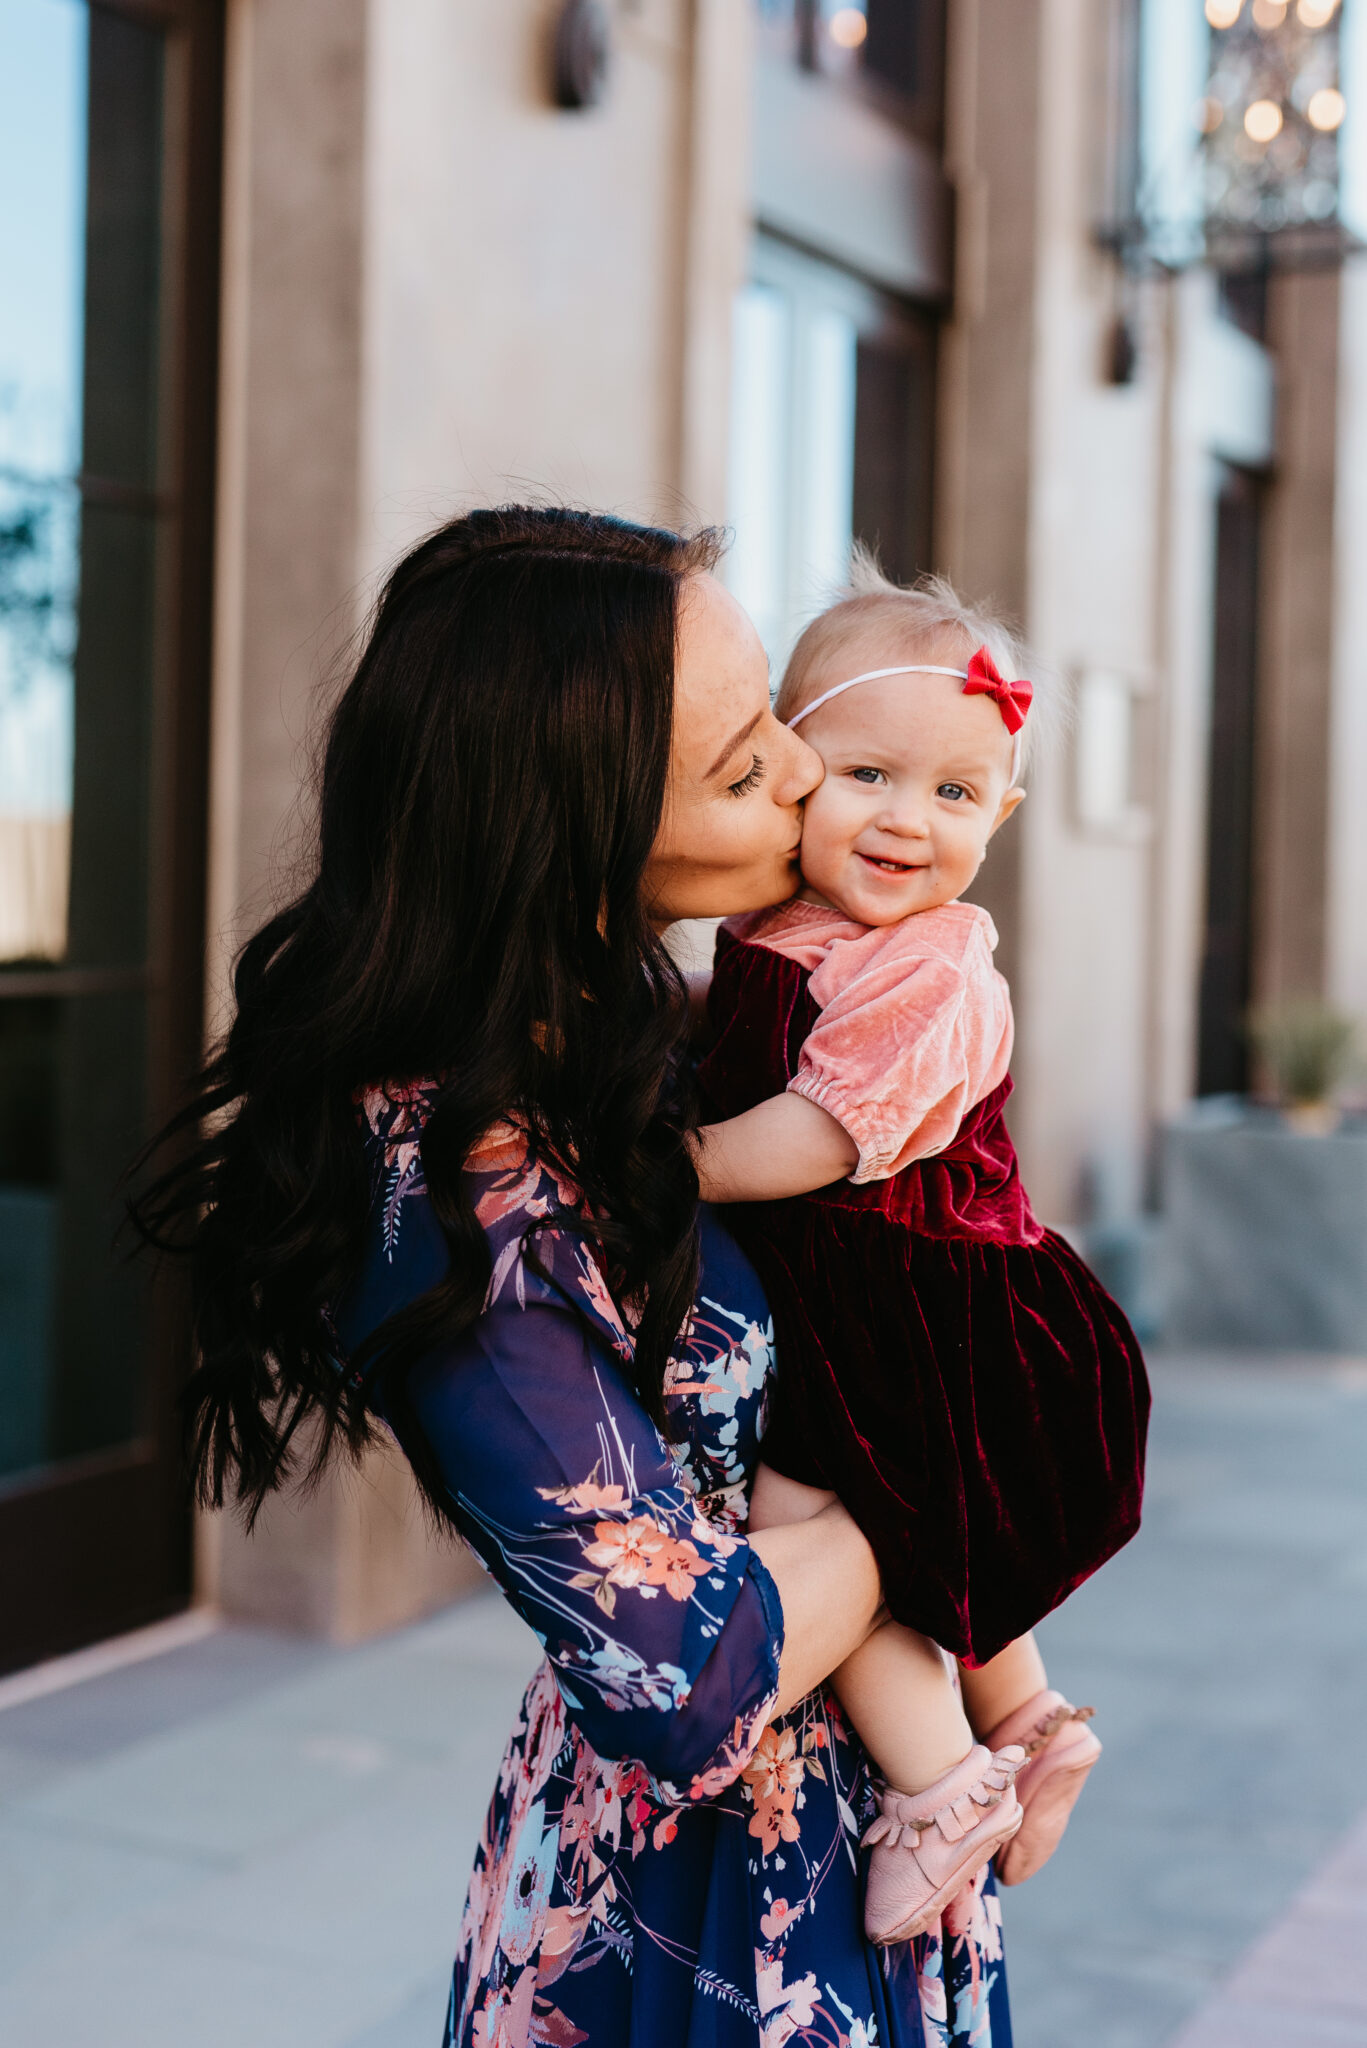 Cute Easter Dresses for Spring featured by top US fashion blog, Outfits & Outings: image of a woman wearing a maxi floral dress with her baby wearing a pink color block dress